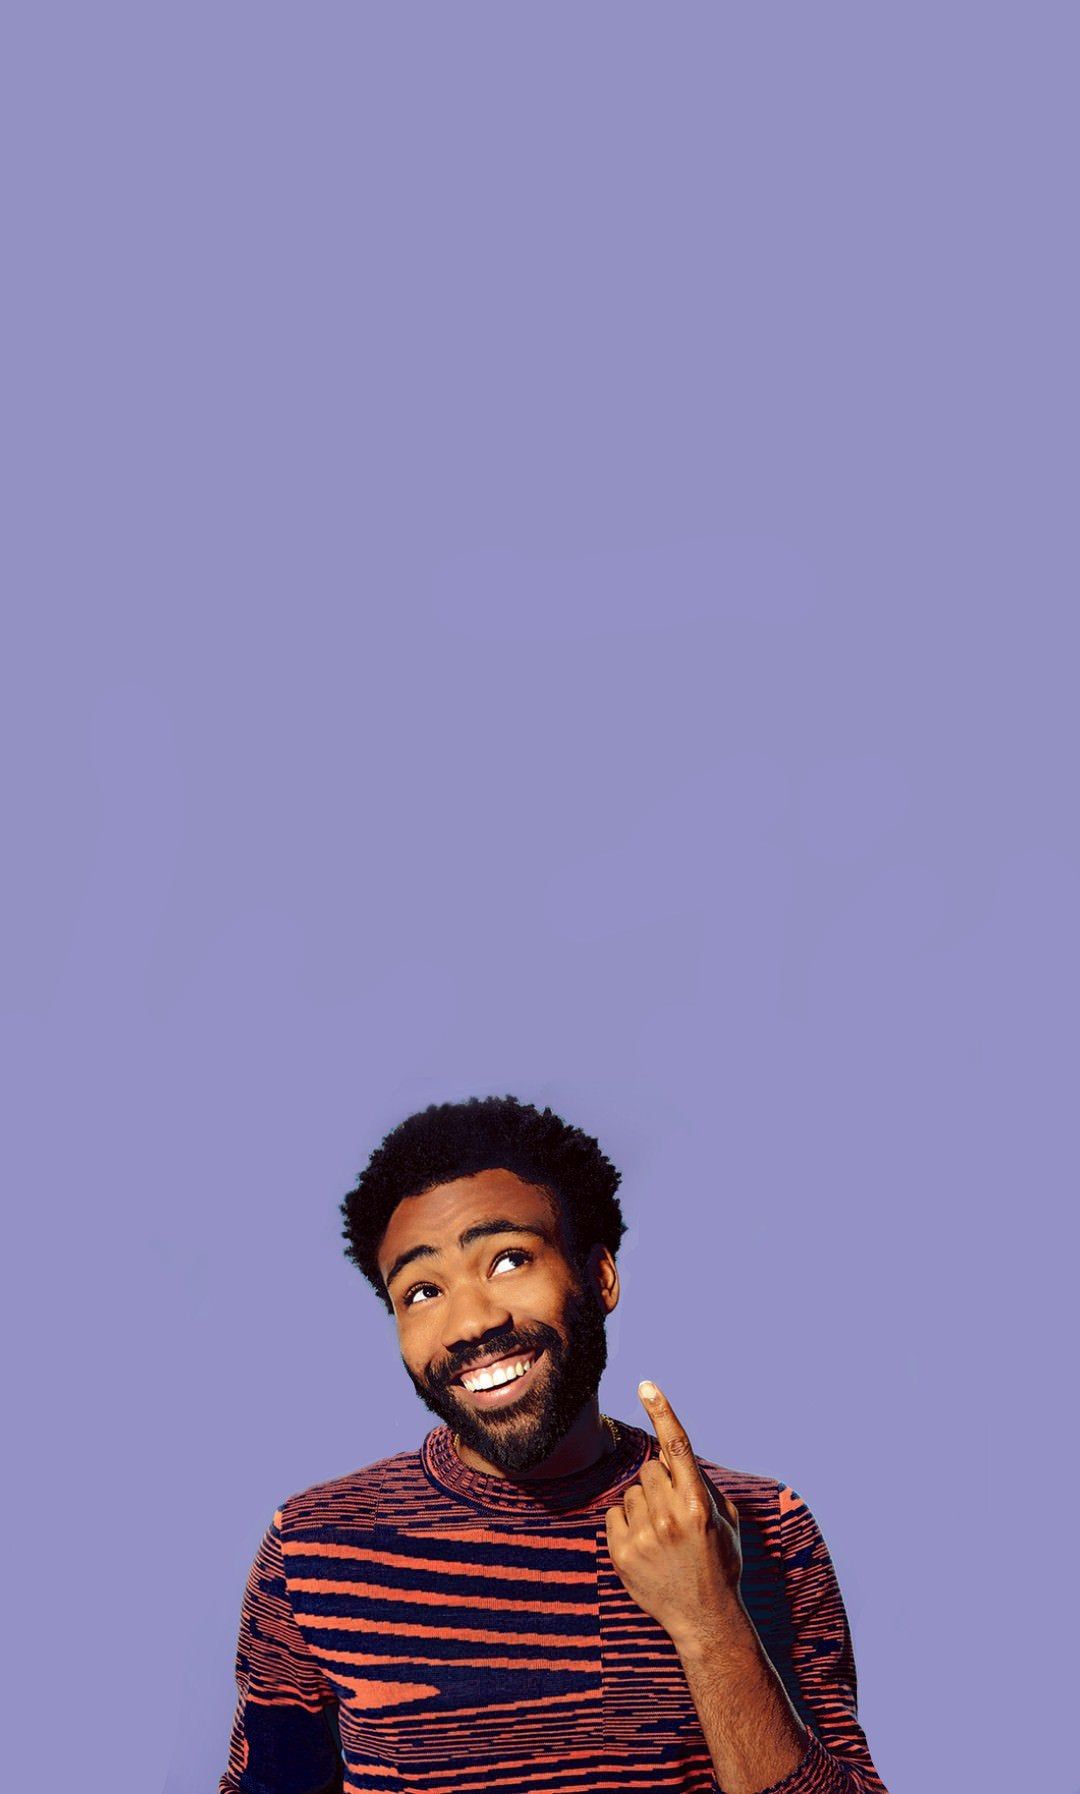 Quick lil wallpaper I made using one of the SNL photo